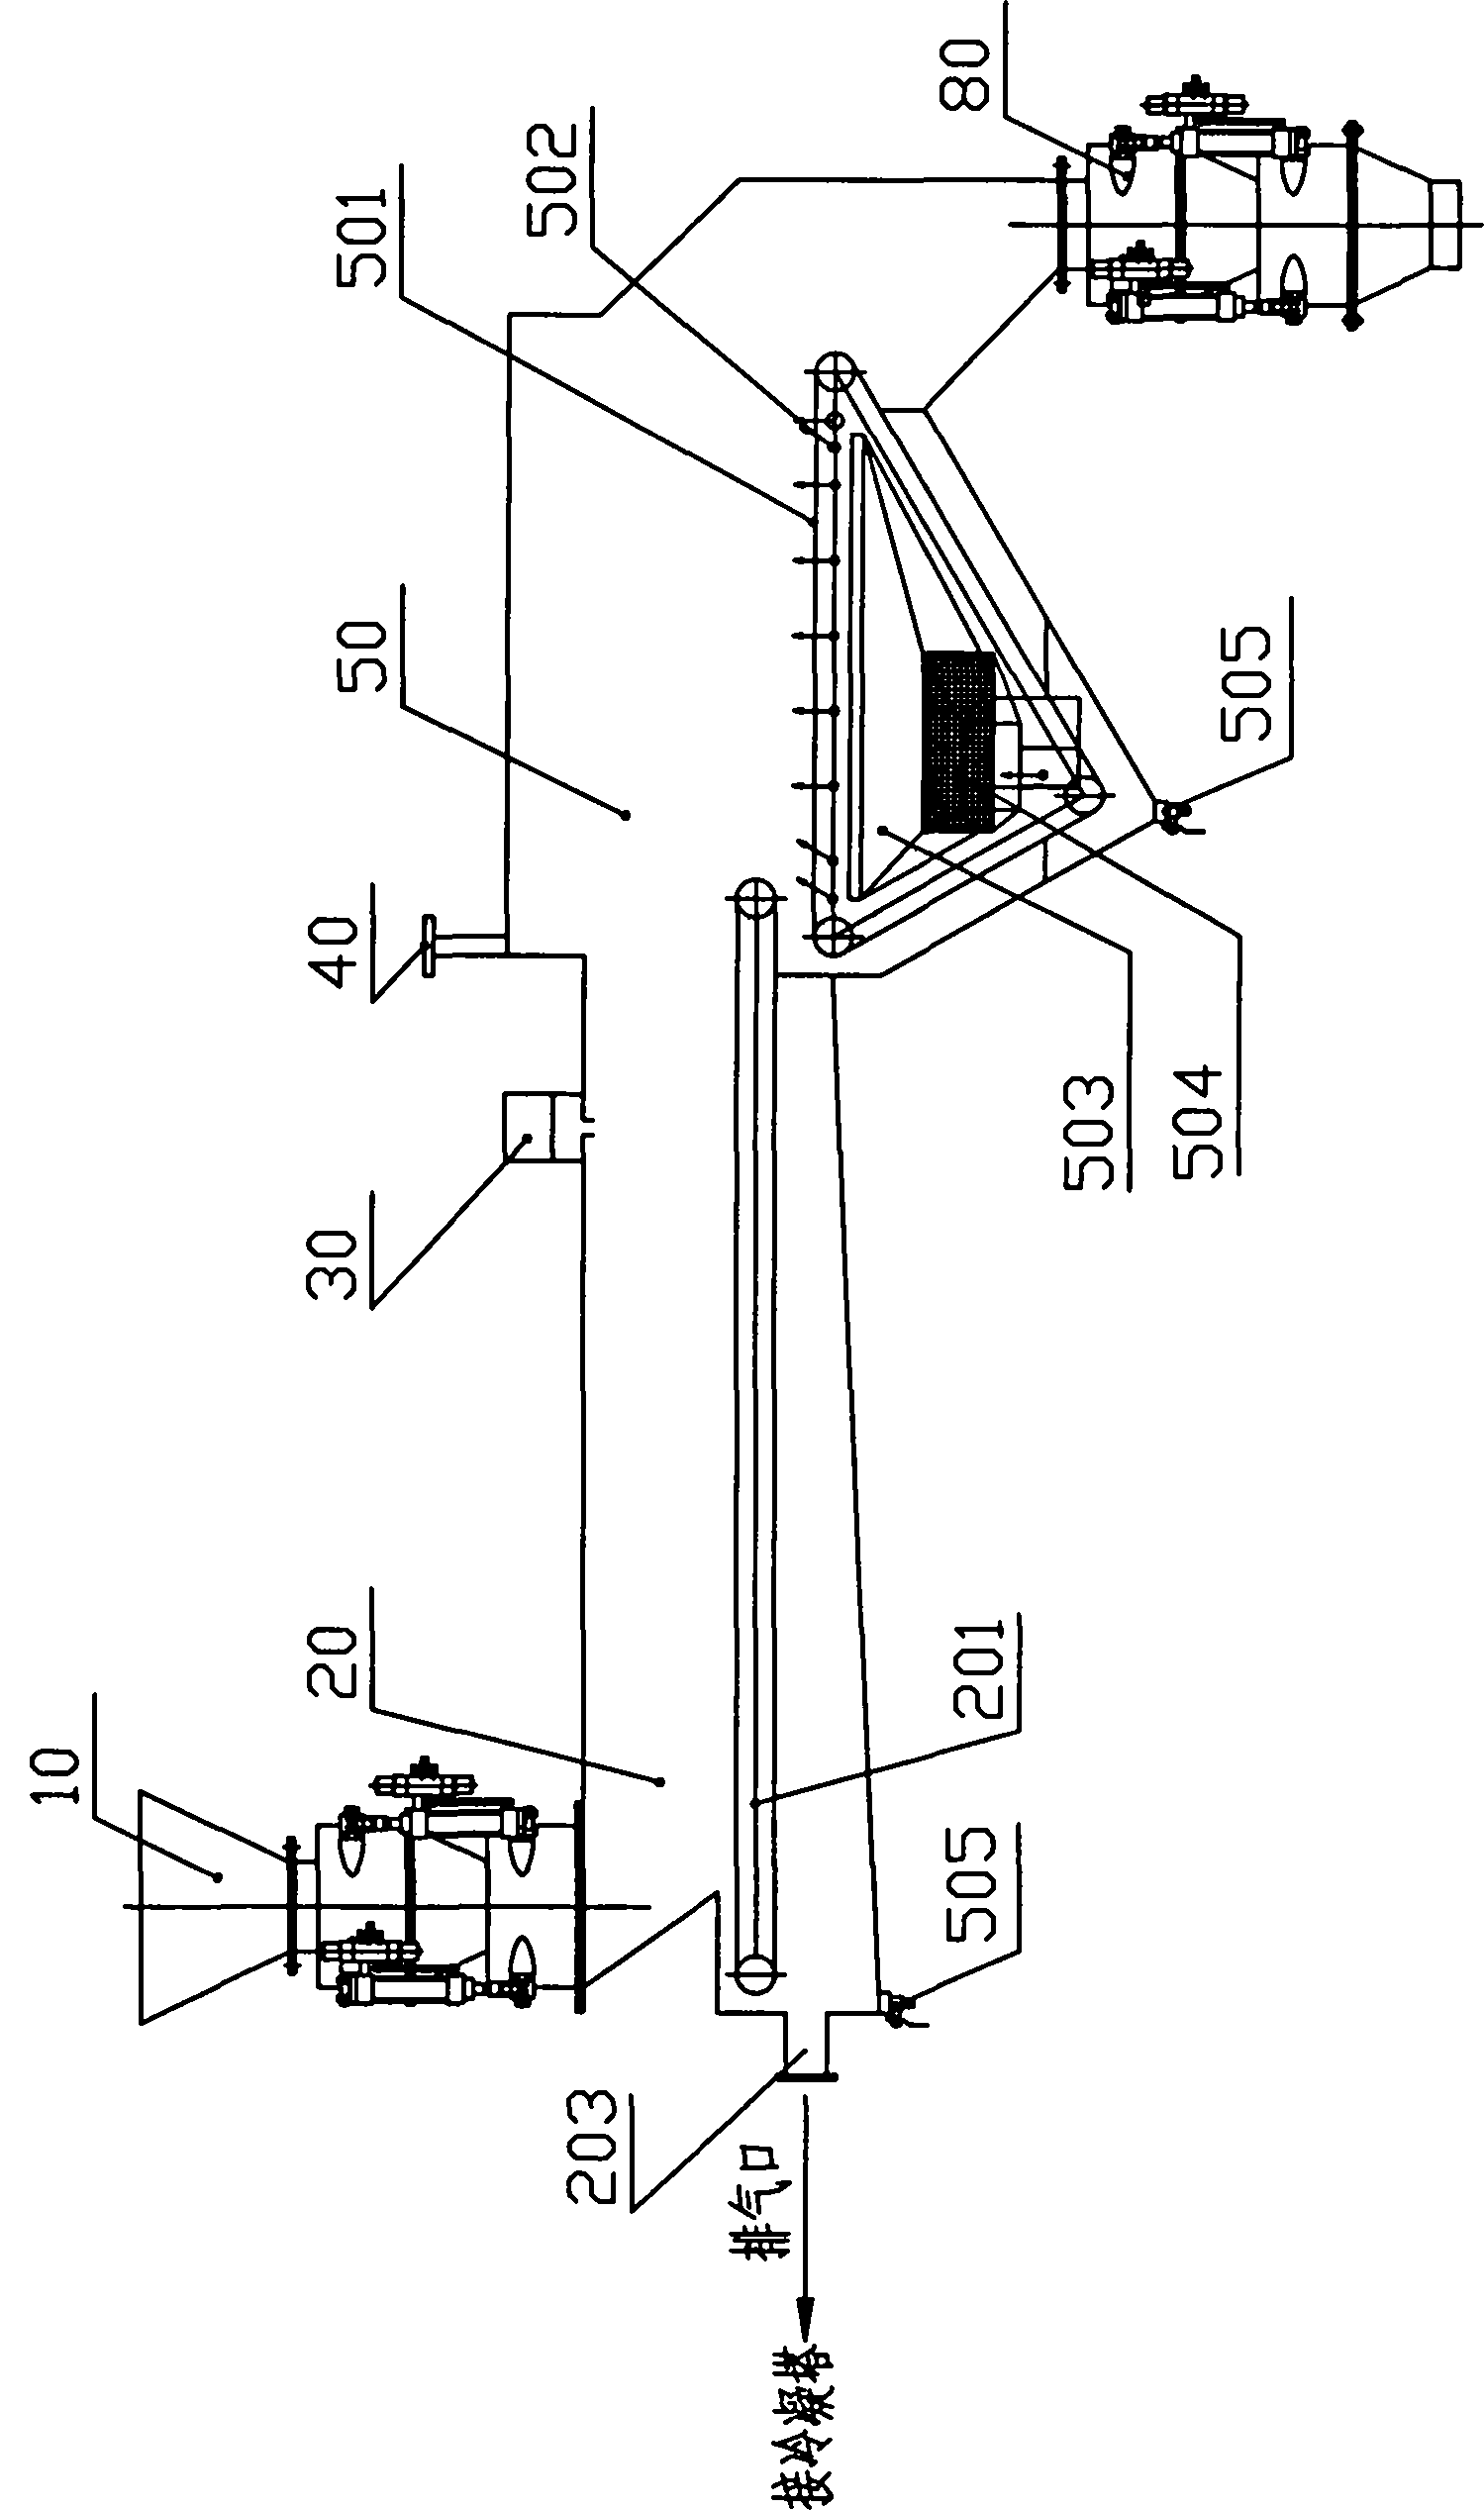 Automatic disassembly and recovery device for electronic components of waste printed circuit board